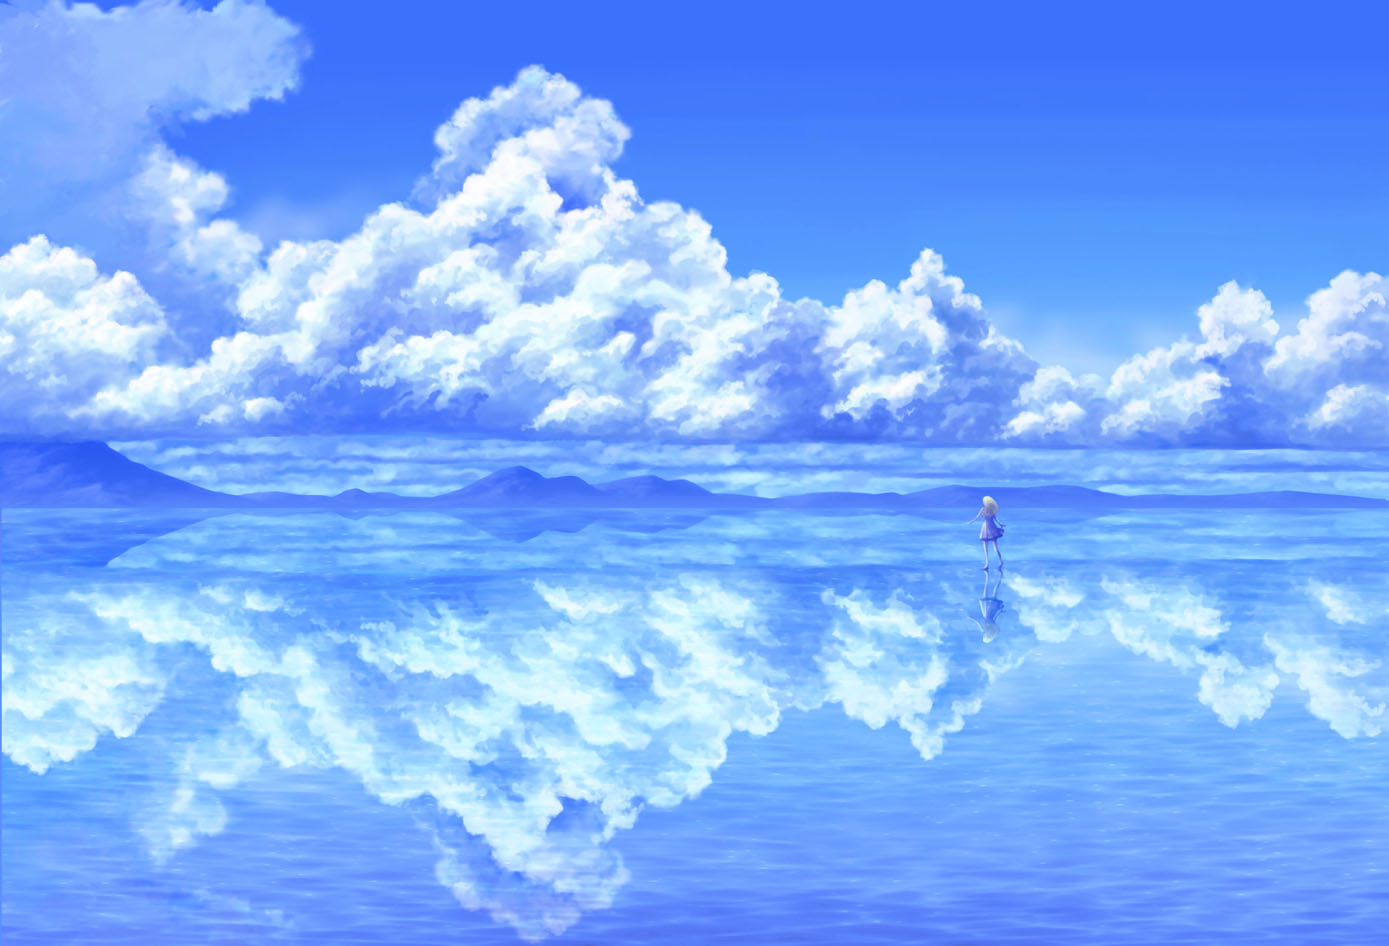 Download A Sad Anime Girl Looking At Her Lonely Reflection Wallpaper |  Wallpapers.com